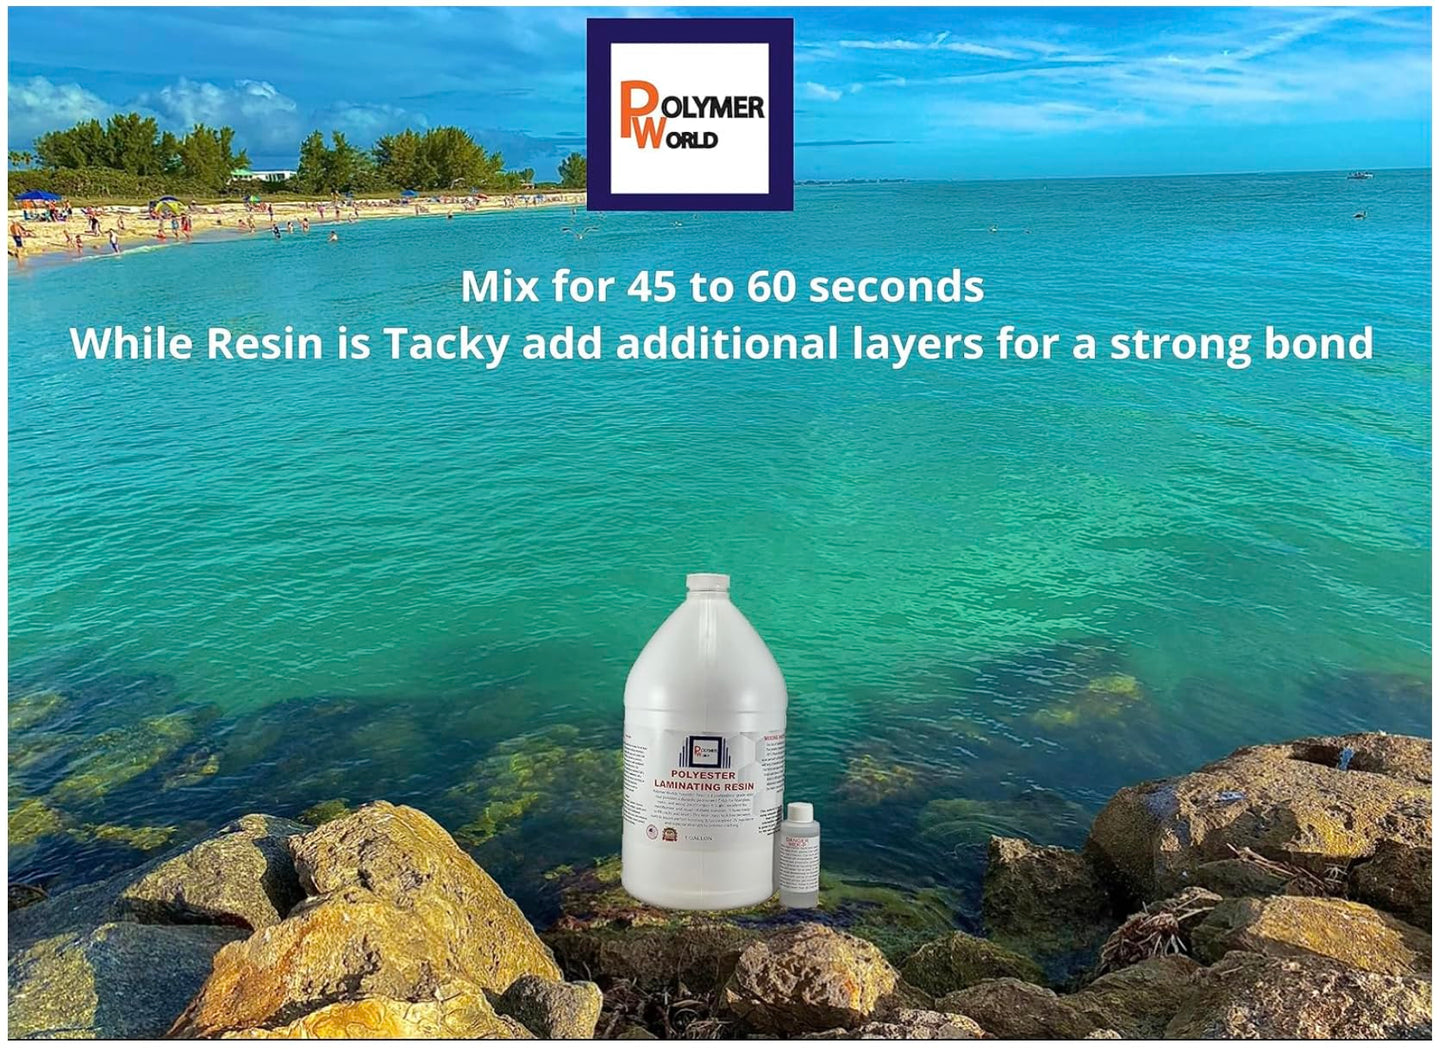 Polymer World- Polyester Resin 2 Gallon Kit with MEKP for Boats, Autos, Surfboards, RV, Pools,Canoes, Jetskis, Watercrafts (PR2G, 1)